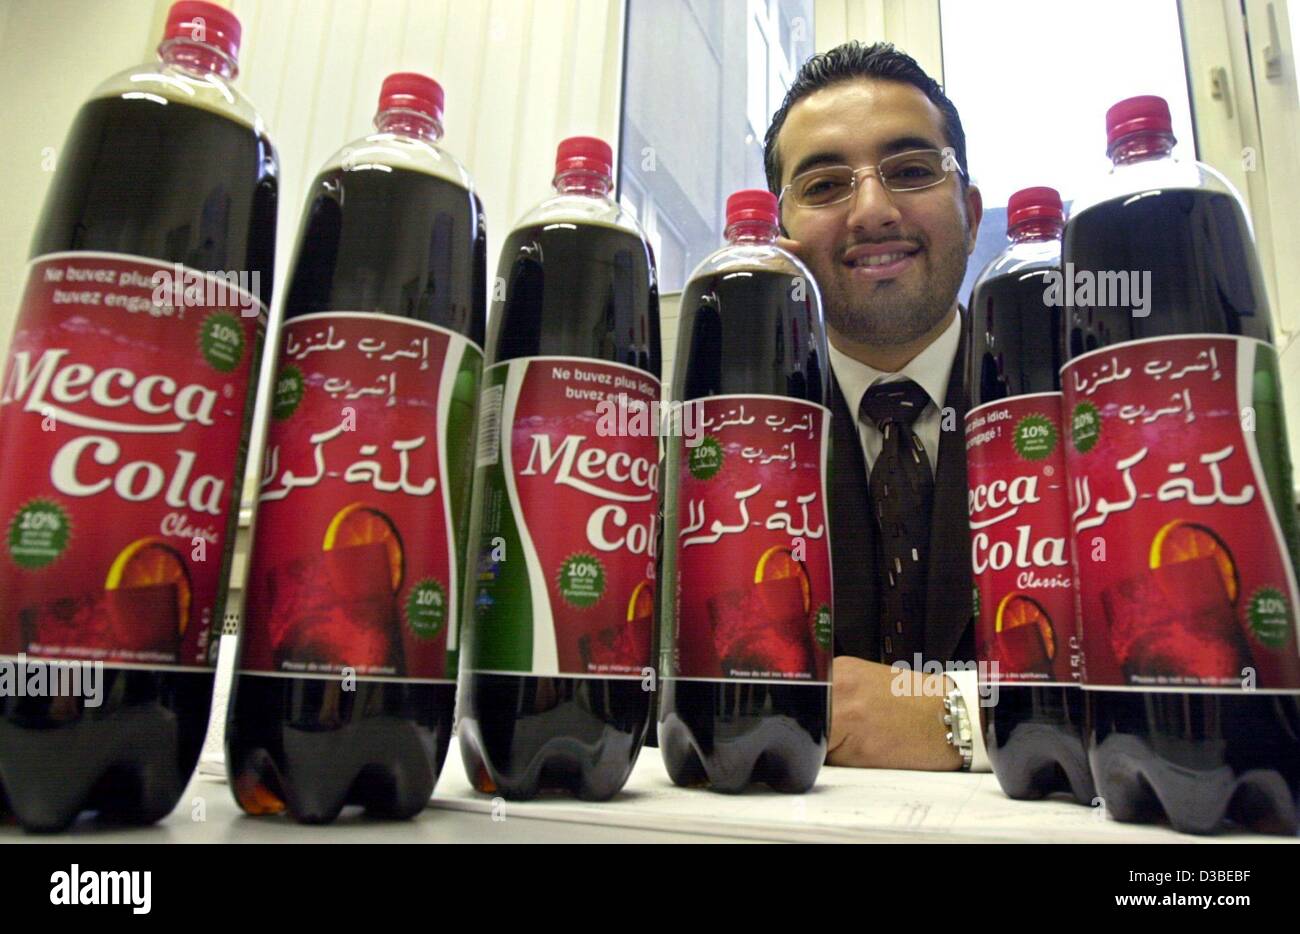 (dpa) - Mahmoud Hinnaui presents some bottles of 'Mecca Cola' in Hamburg, 15 January 2003. Mecca Cola is the Islamic version of Coca Cola. Since beginning of December 2002 Hinnaui started to sell the softdrink in his adopted country Germany, with growing success. The 28-year-old Syrian lives in Germ Stock Photo